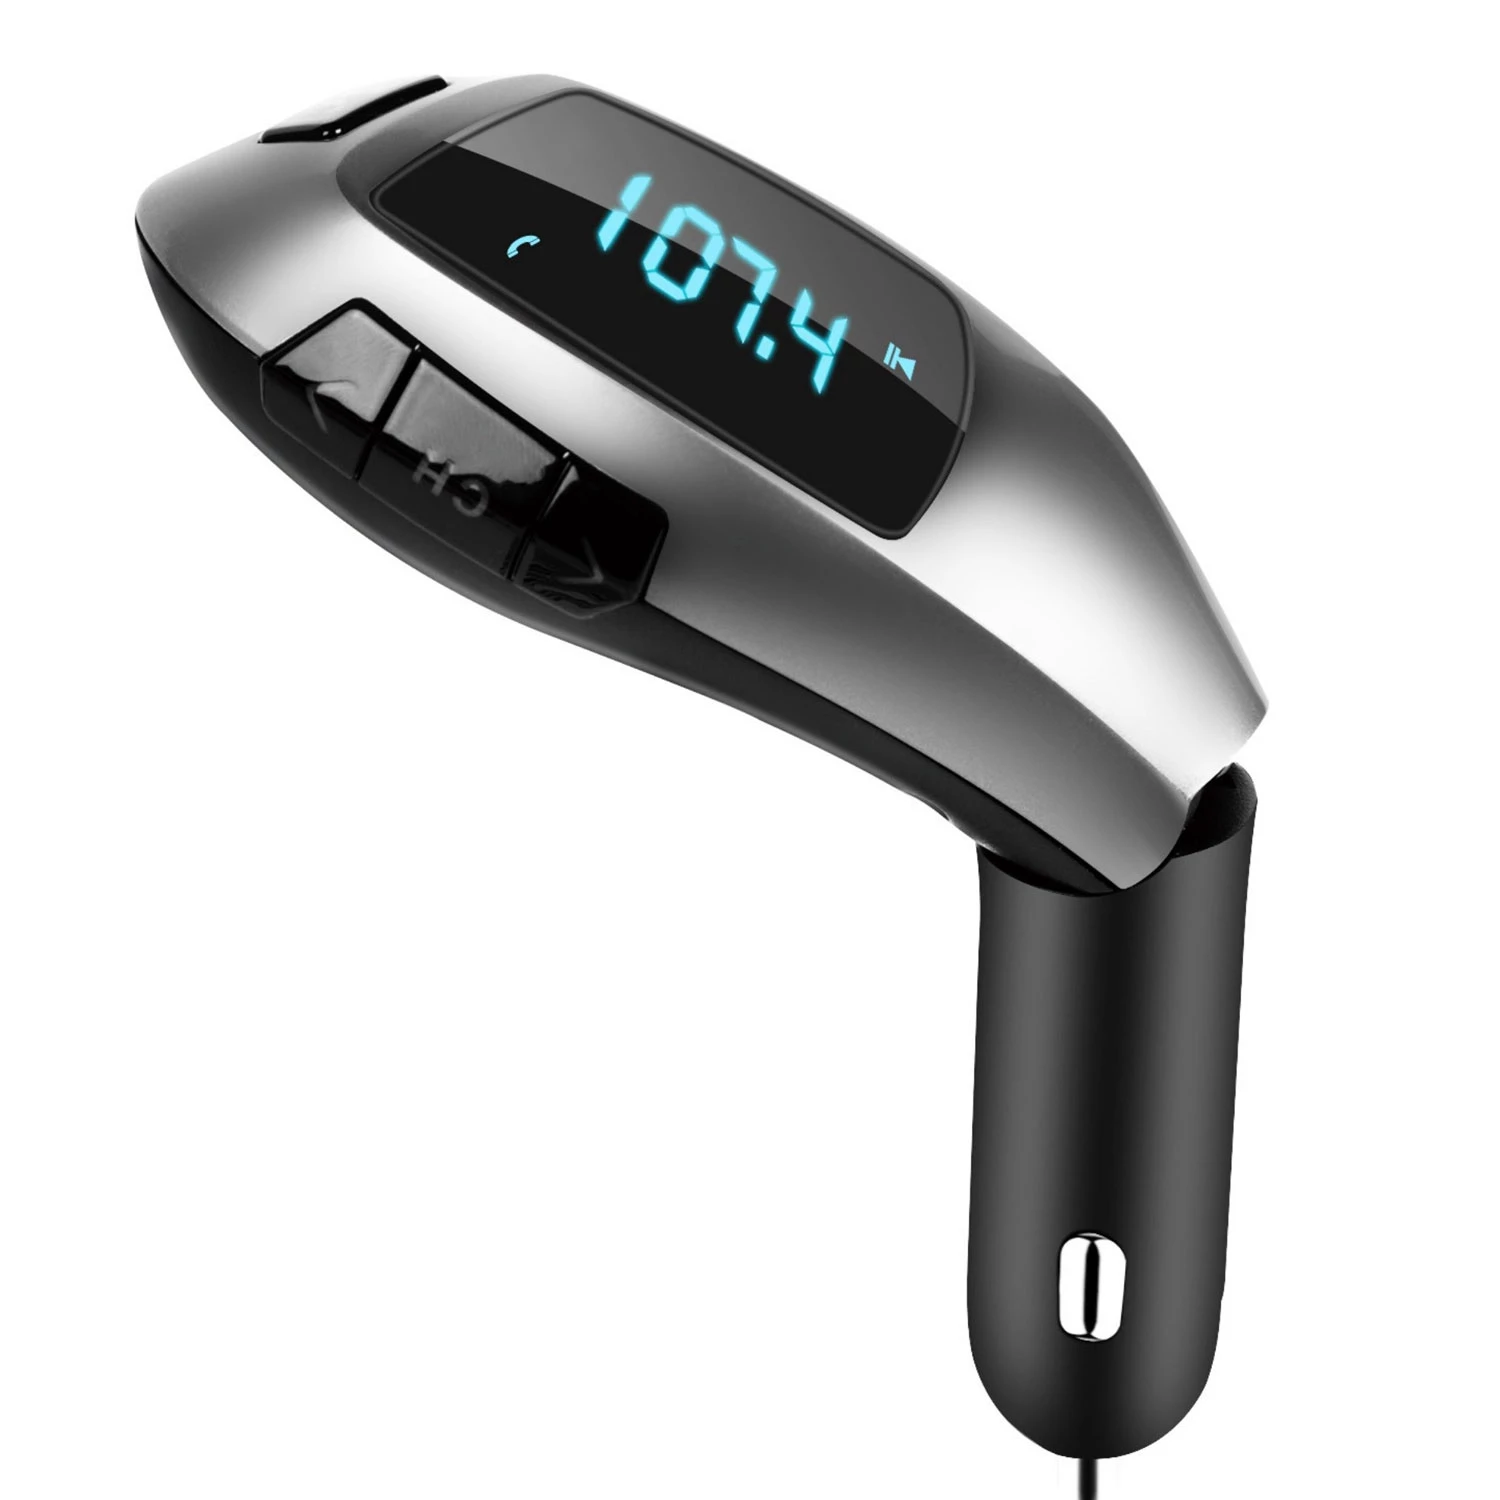 FM Transmitter: Car USB Charger, Hands-free Call, MP3 Player. Supports U Disk And TF Card Reading